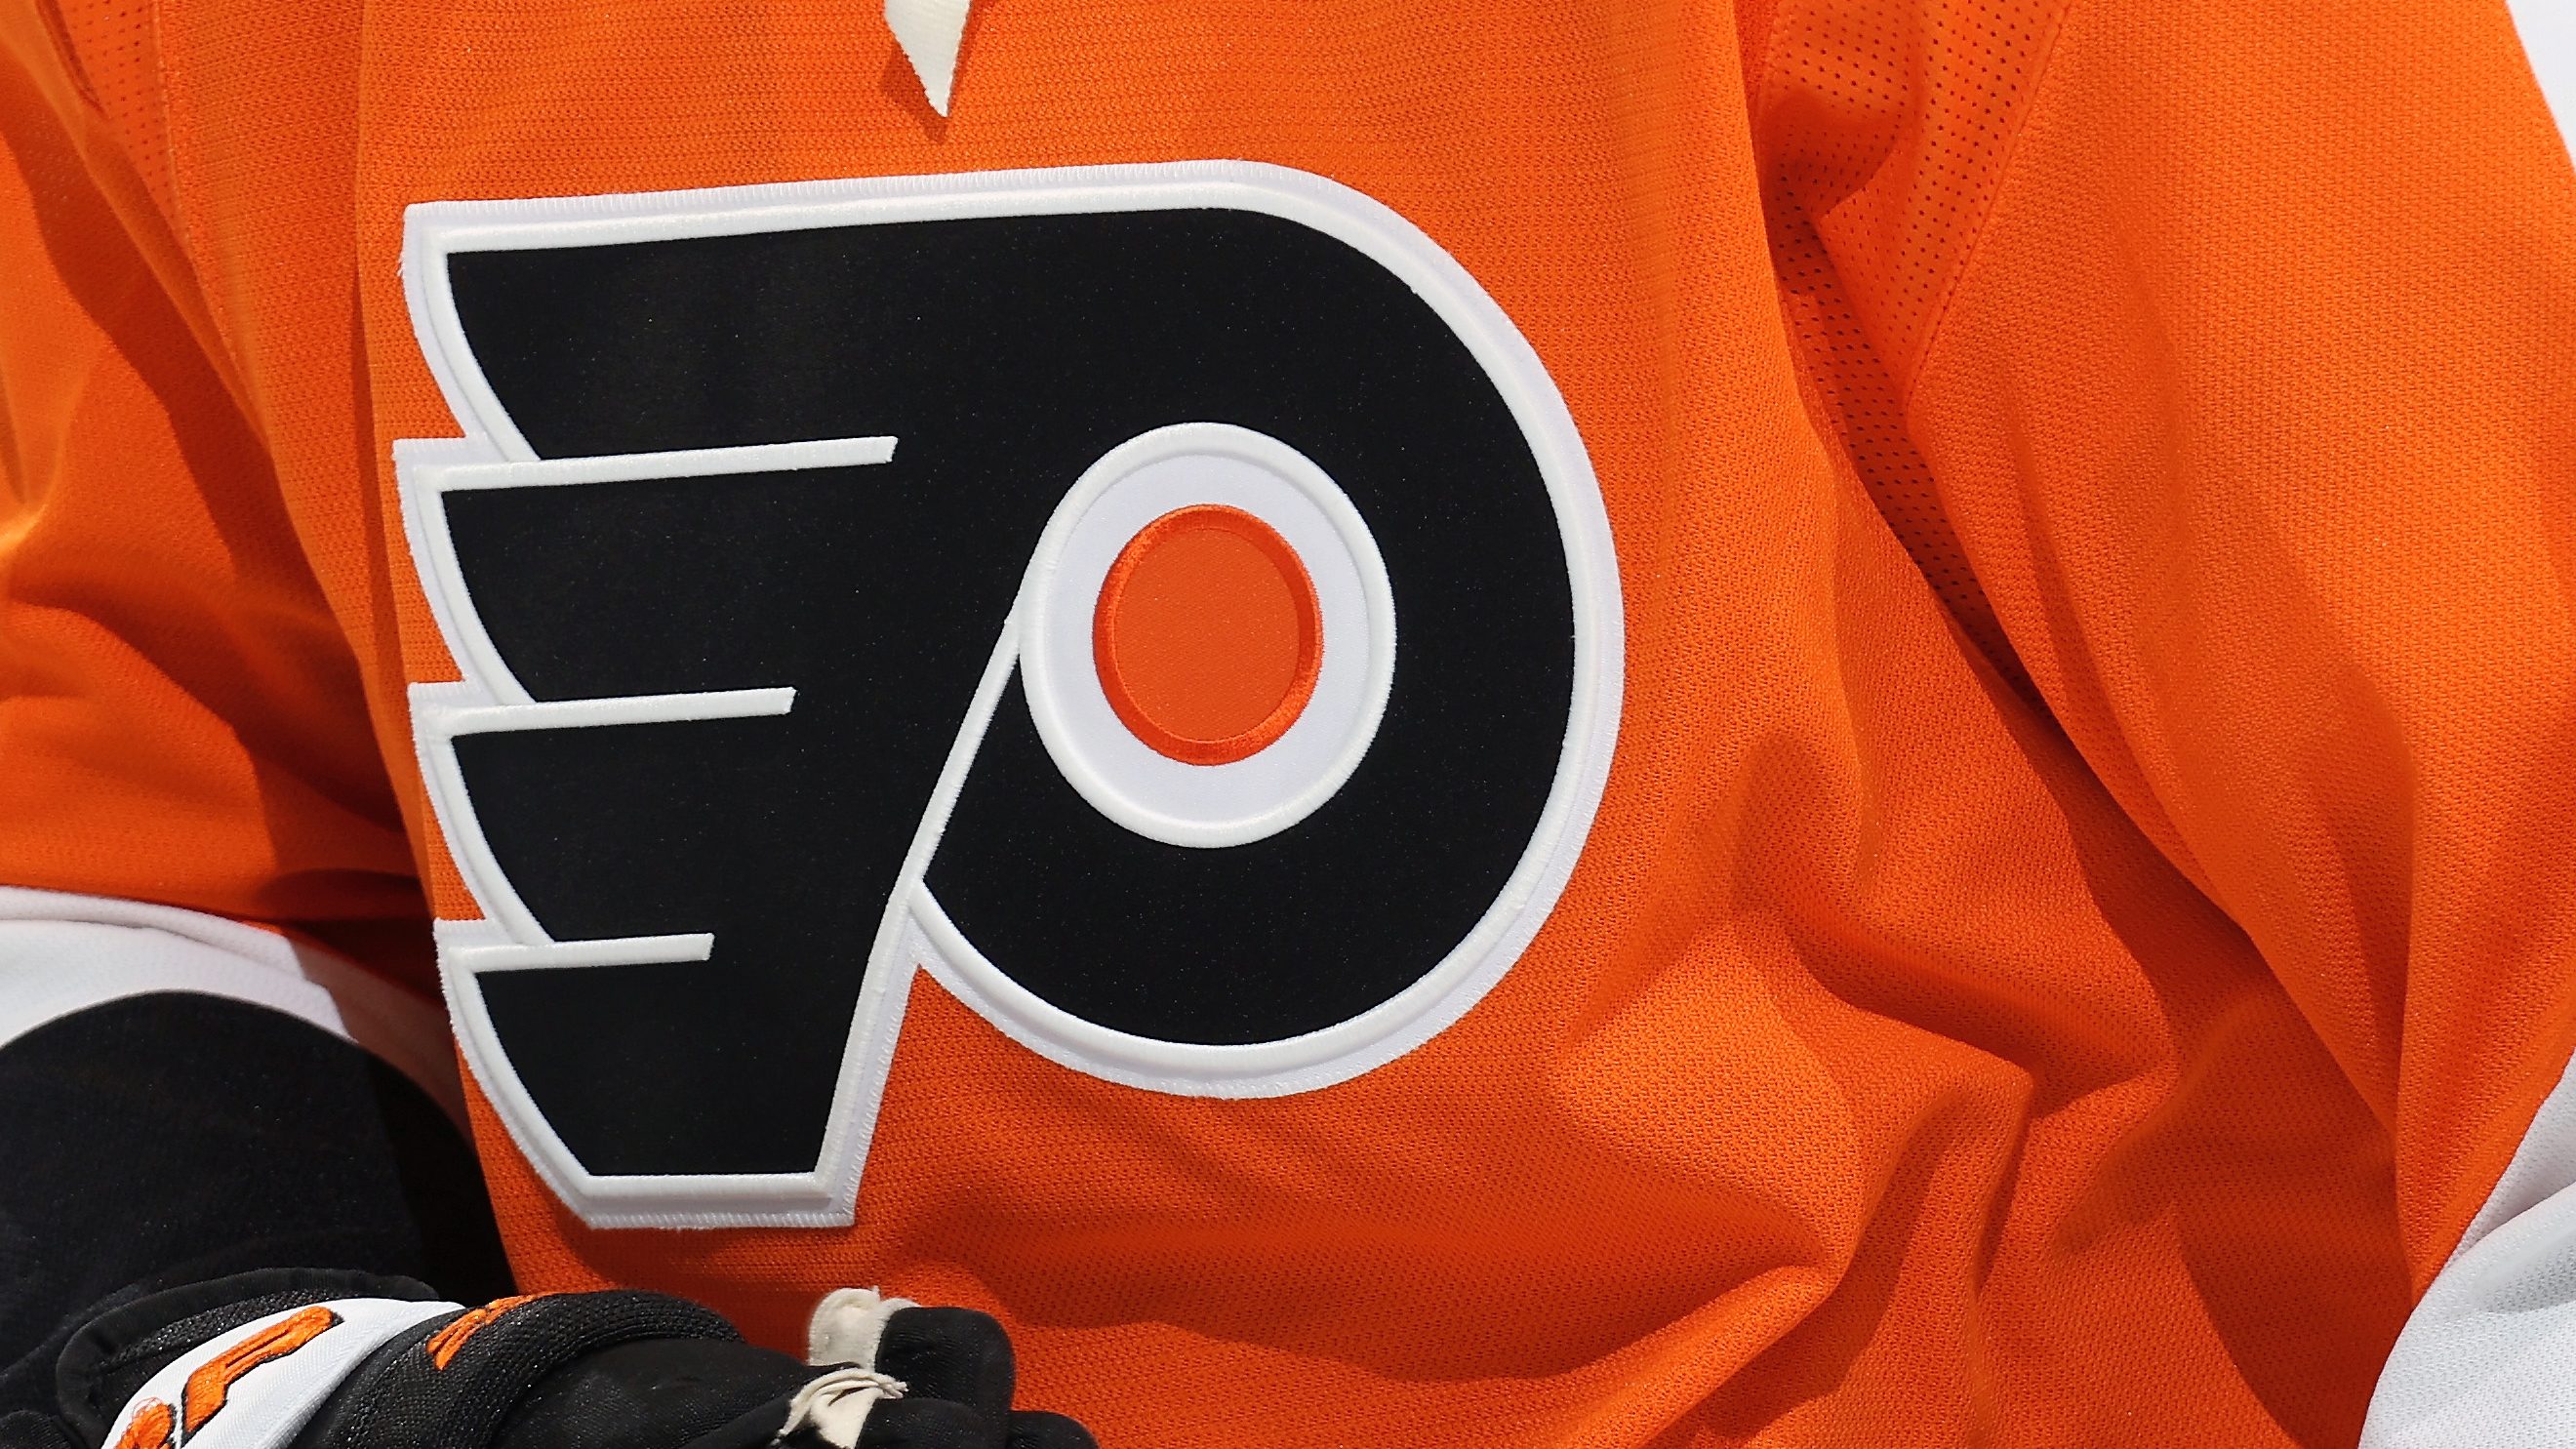  Flyers combine past and present in updated uniforms